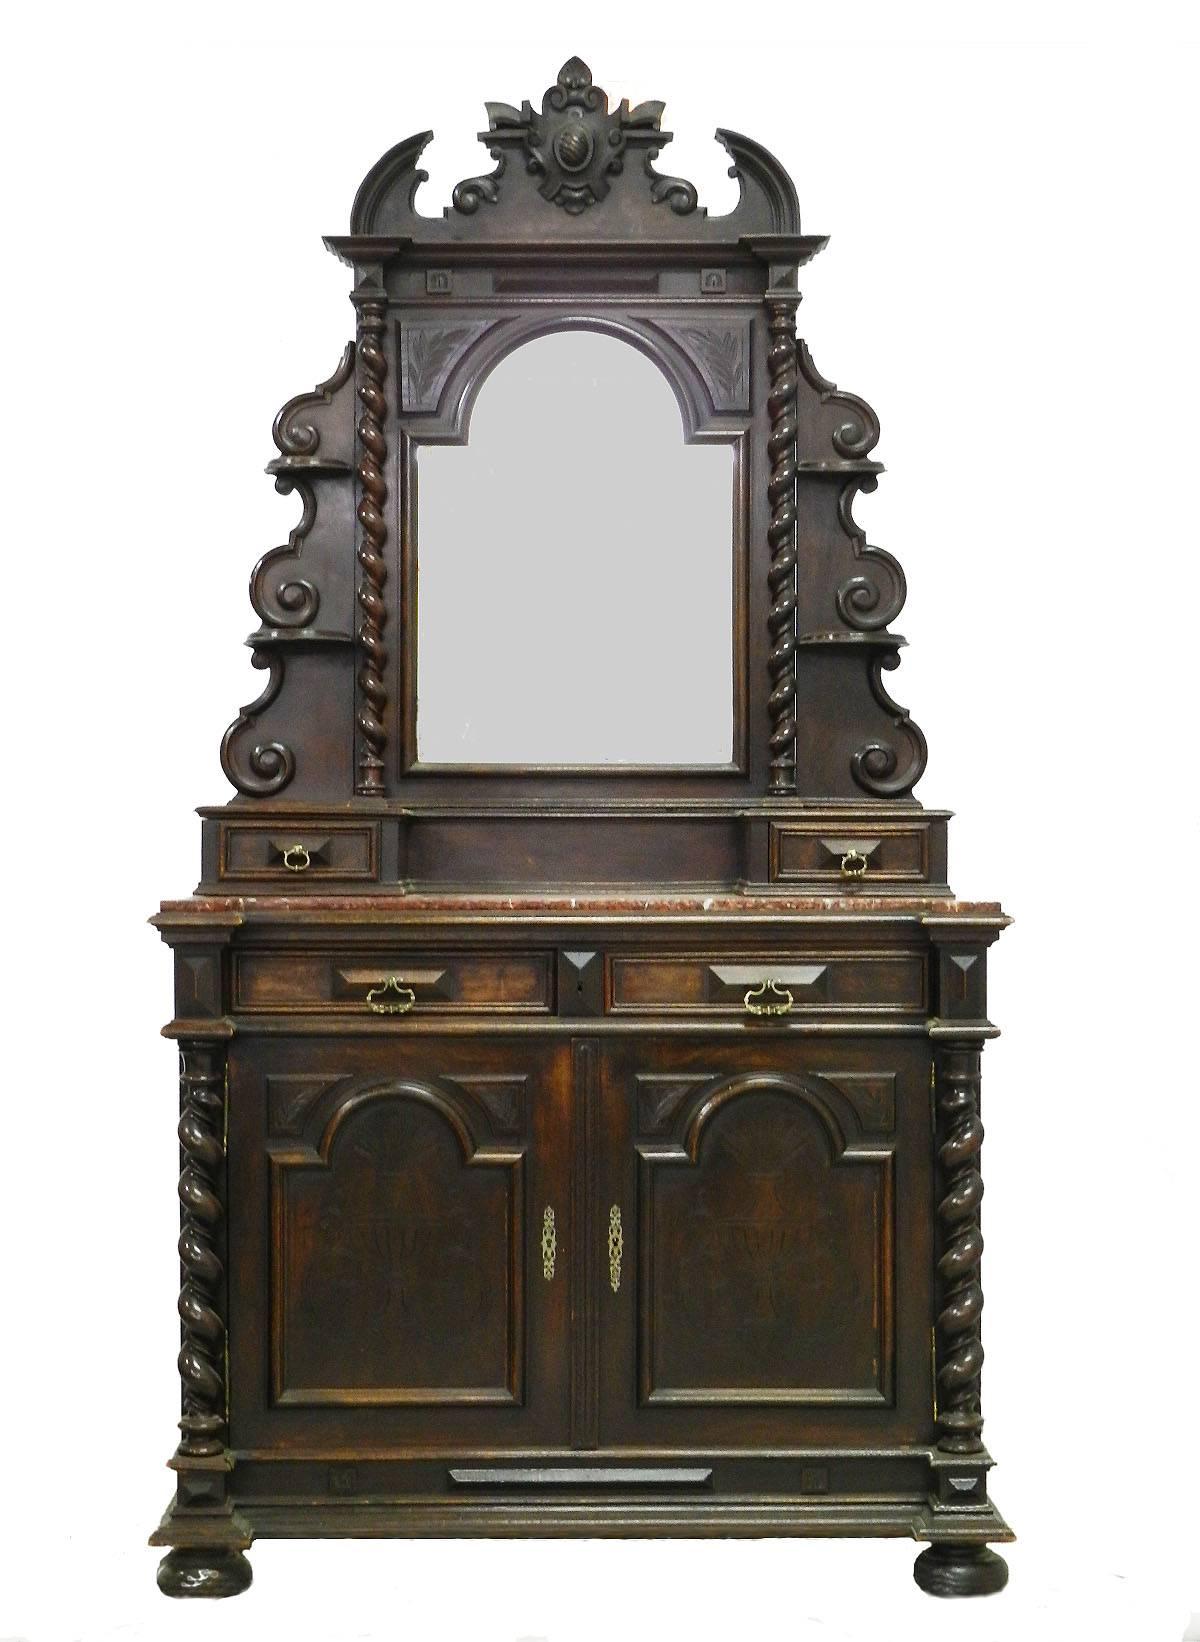 Sideboard buffet 19th century Louis XIII revival, circa 1850.
Credenza dresser cupboard
original bevelled mirror
variegated rouge marble top
carved dark walnut
with key.





 